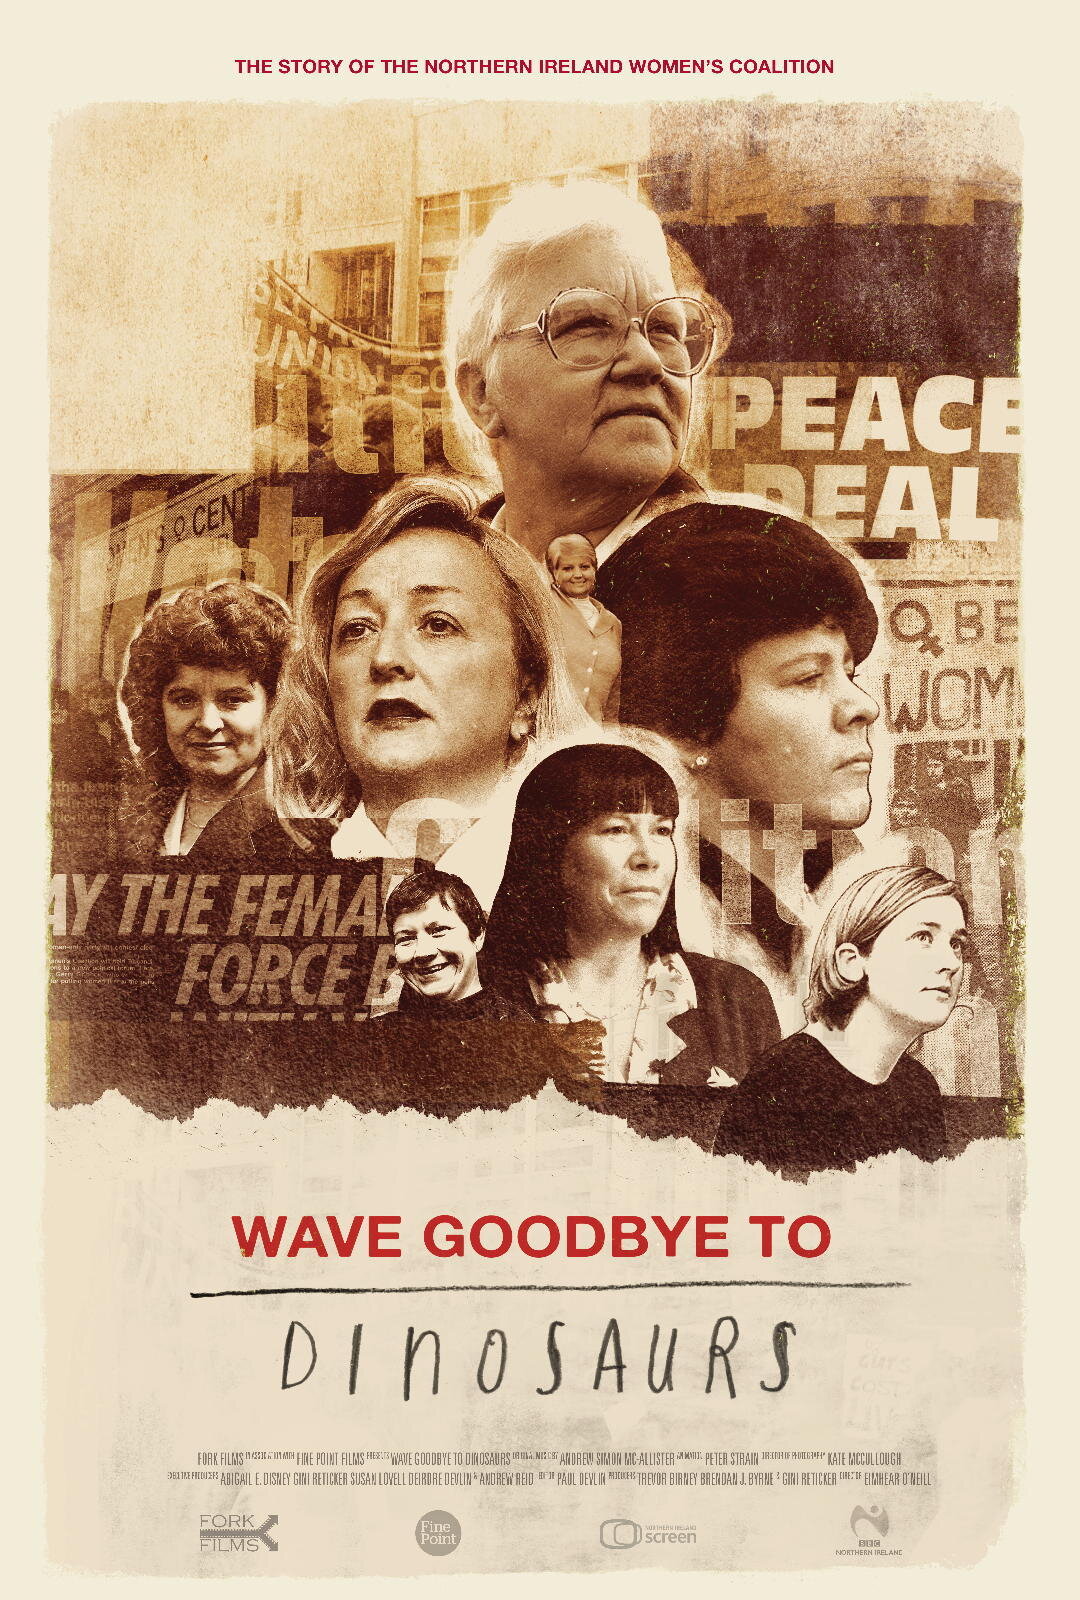 Documentary film about the NI peace heroines